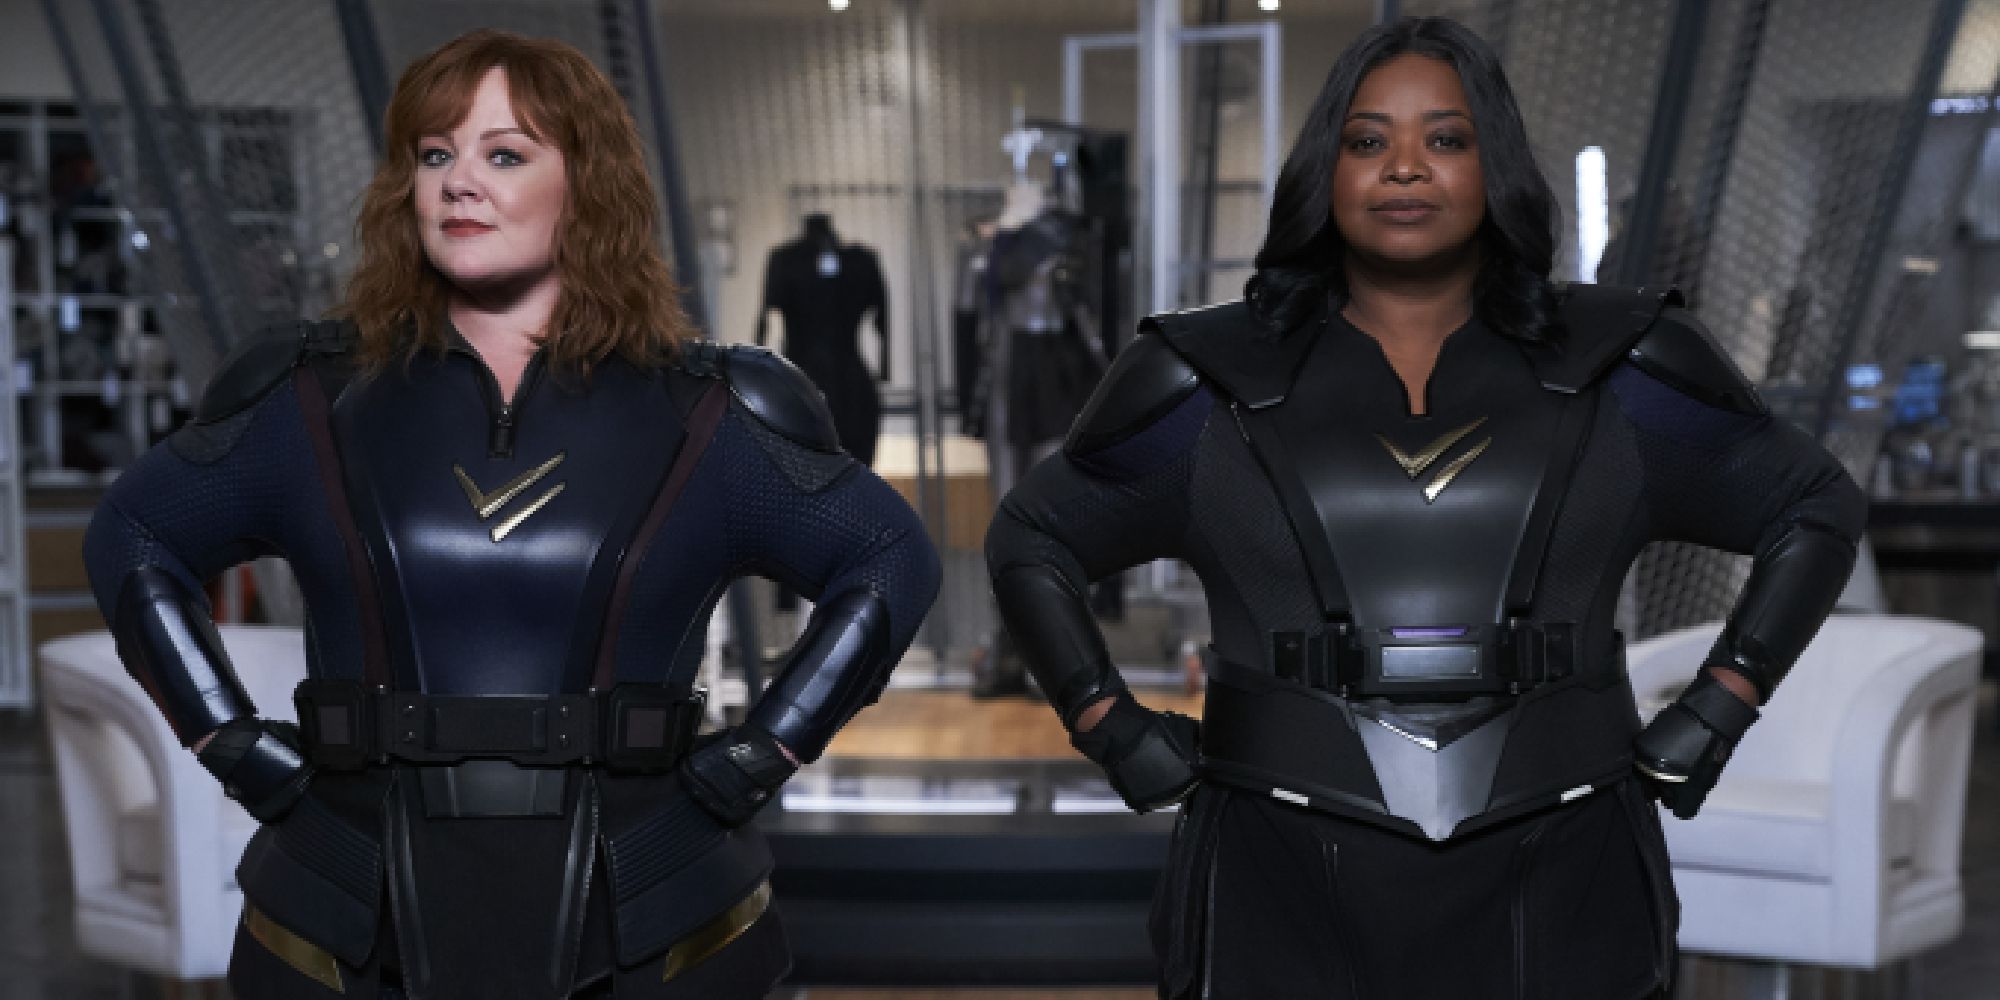 Octavia Spencer and Melissa McCarthy in Thunder Force